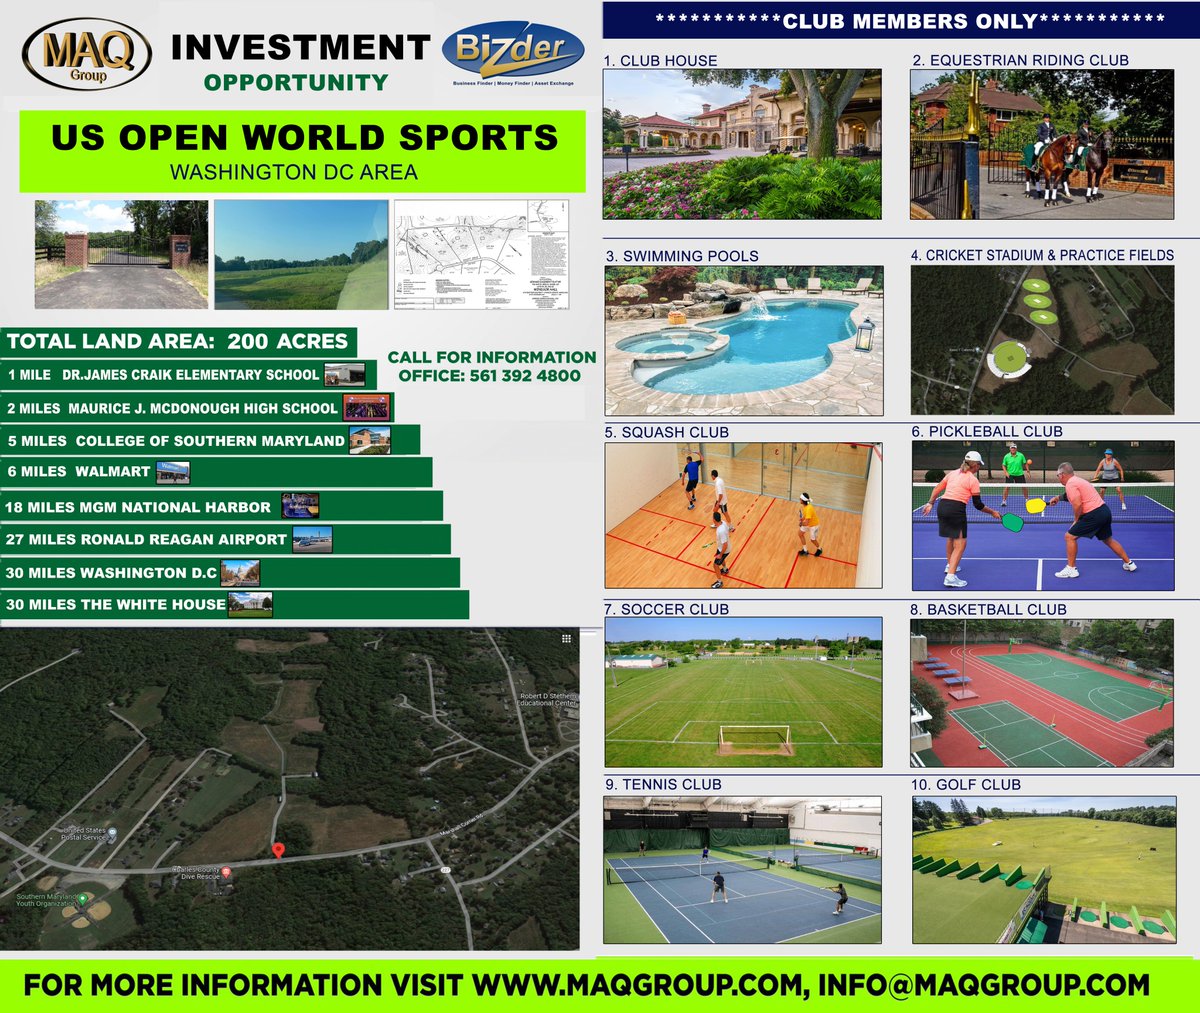 US OPEN WORLD SPORTS INVESTMENT OPPORTUNITY!!! Contact MAQGROUP.COM INFO@MAQGROUP.COM call 561 392 4800 - maqgroup.com WASHINGTON DC AREA 200 ACRES #maqgroup #ccusa #usopen #world #sports #usopenworldsports #soccer #tennis #golf #basketball #pickleball